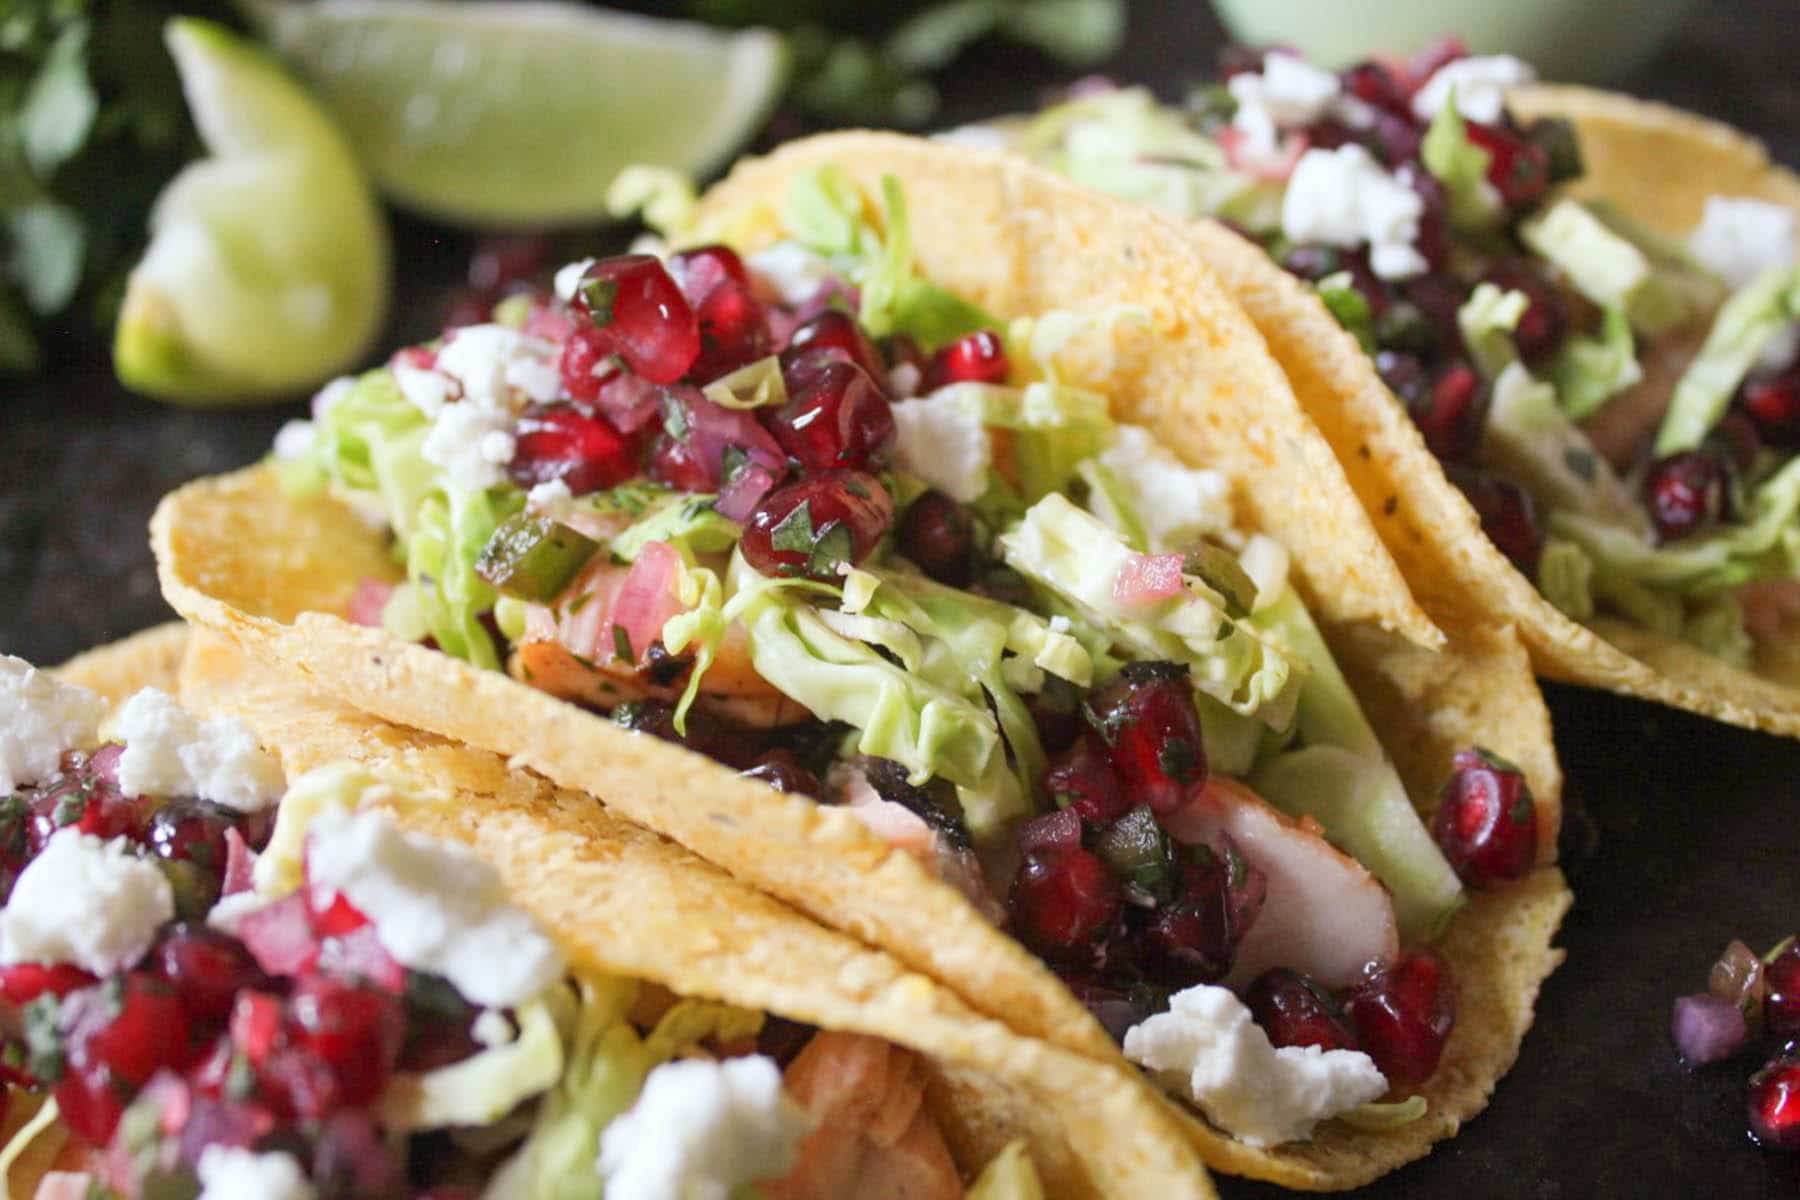 Grilled-Salmon-Tacos-with-Pomegranate-Jalapeno-Salsa-with-Brussels-Sprouts-and-Goat-Cheese-6